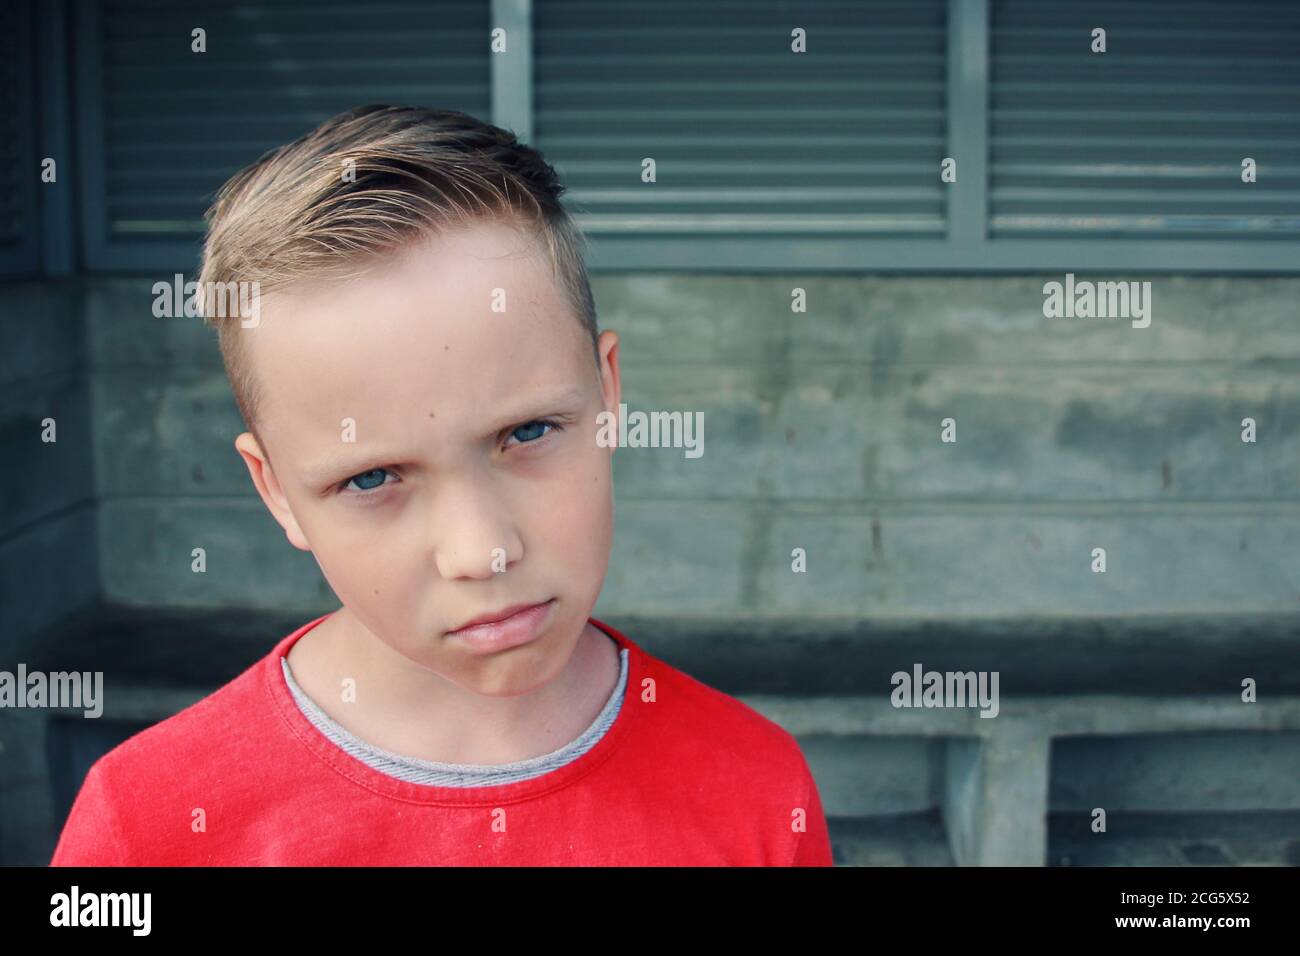 Cute little blue eyed european blond boy looks sad and frustrated. He is looking with sorrow pensive expression in his face.Emotional expression face. Stock Photo